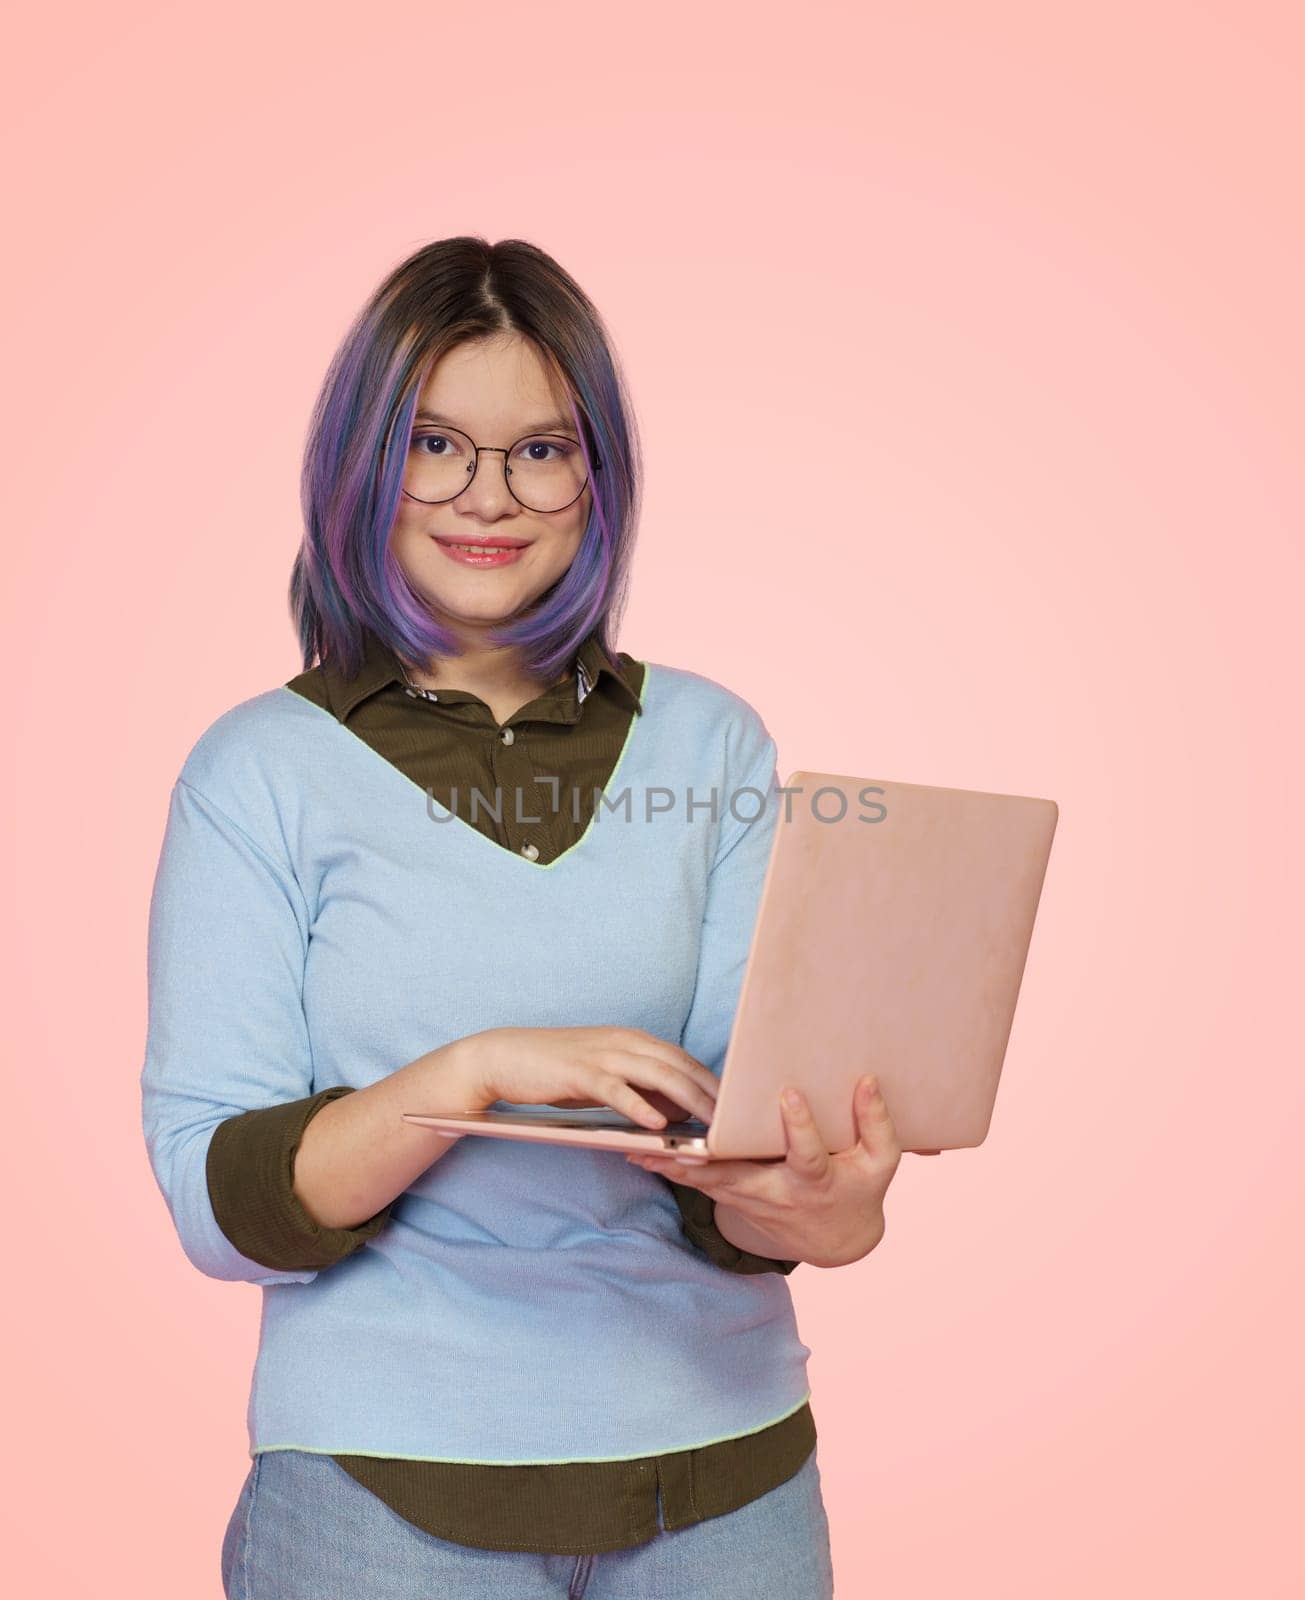 Friendly female student with laptop smiles against cheerful pink background. Dedicated and motivated student who excels in studies, creating vision of success and achievement in educational journey. High quality photo